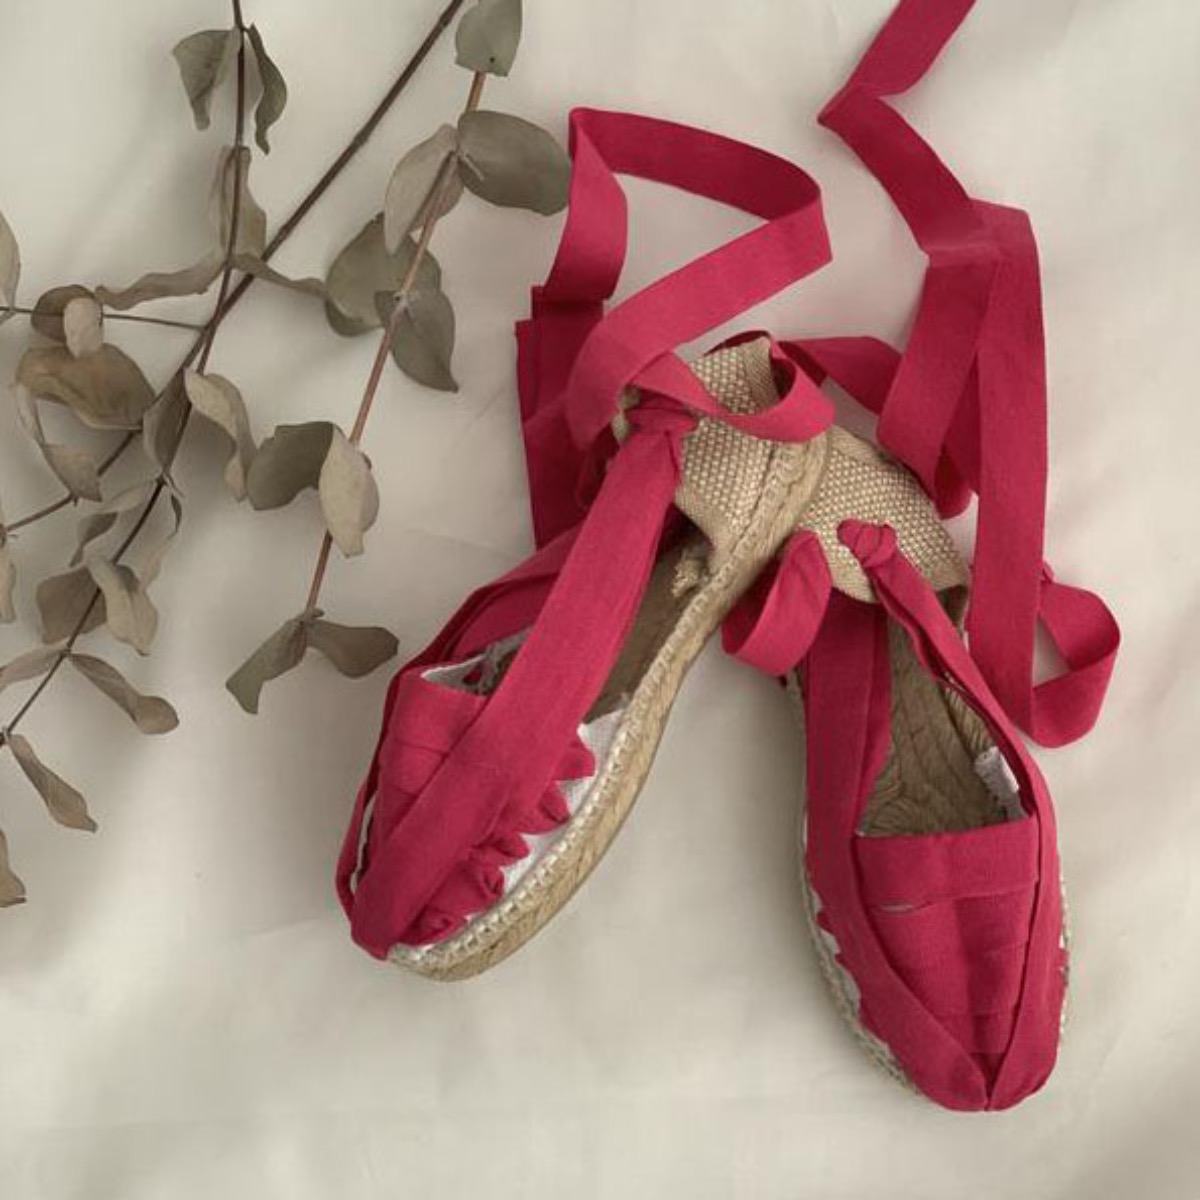 HANDCRAFTED VALENCIAN ESPADRILLES/VALESPPINK